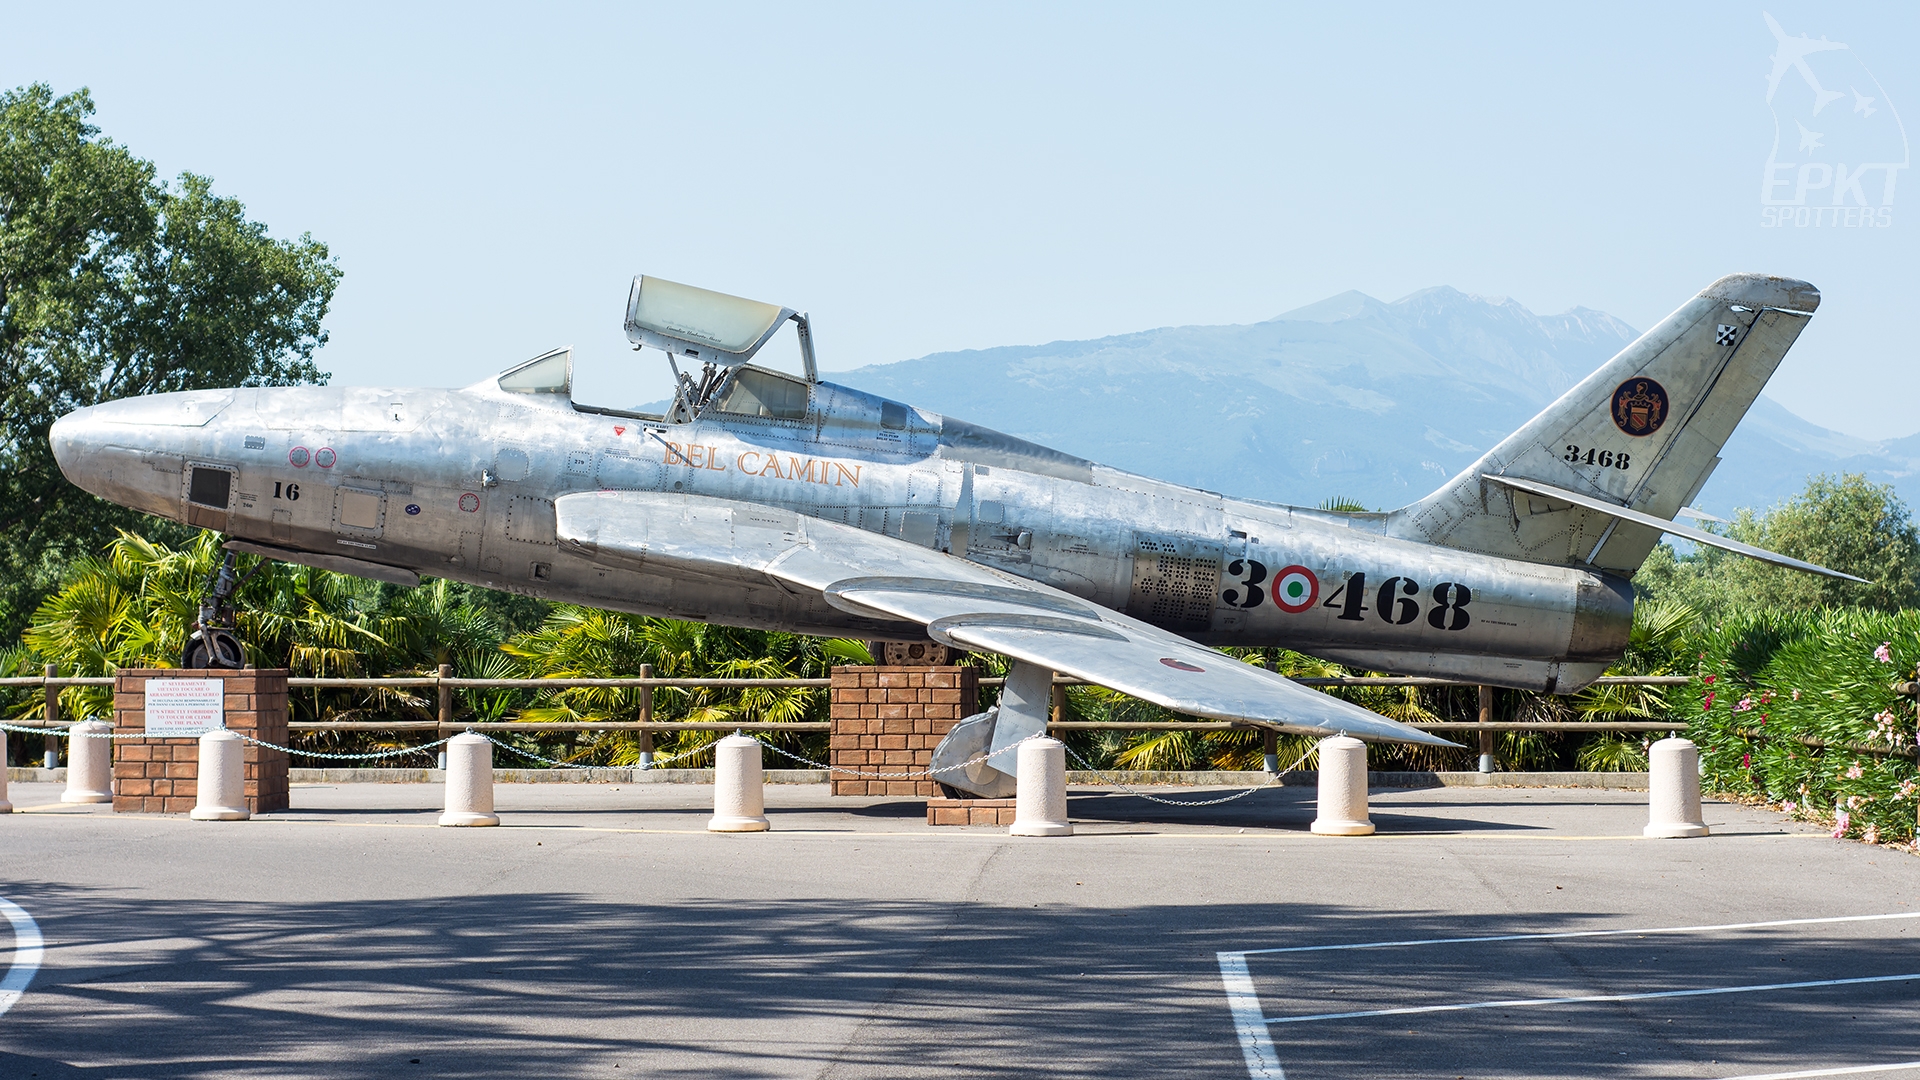 MM527471 - Republic RF-84F Thunderflash (Italy - Air Force) / Other location - Bussolengo Italy [/]